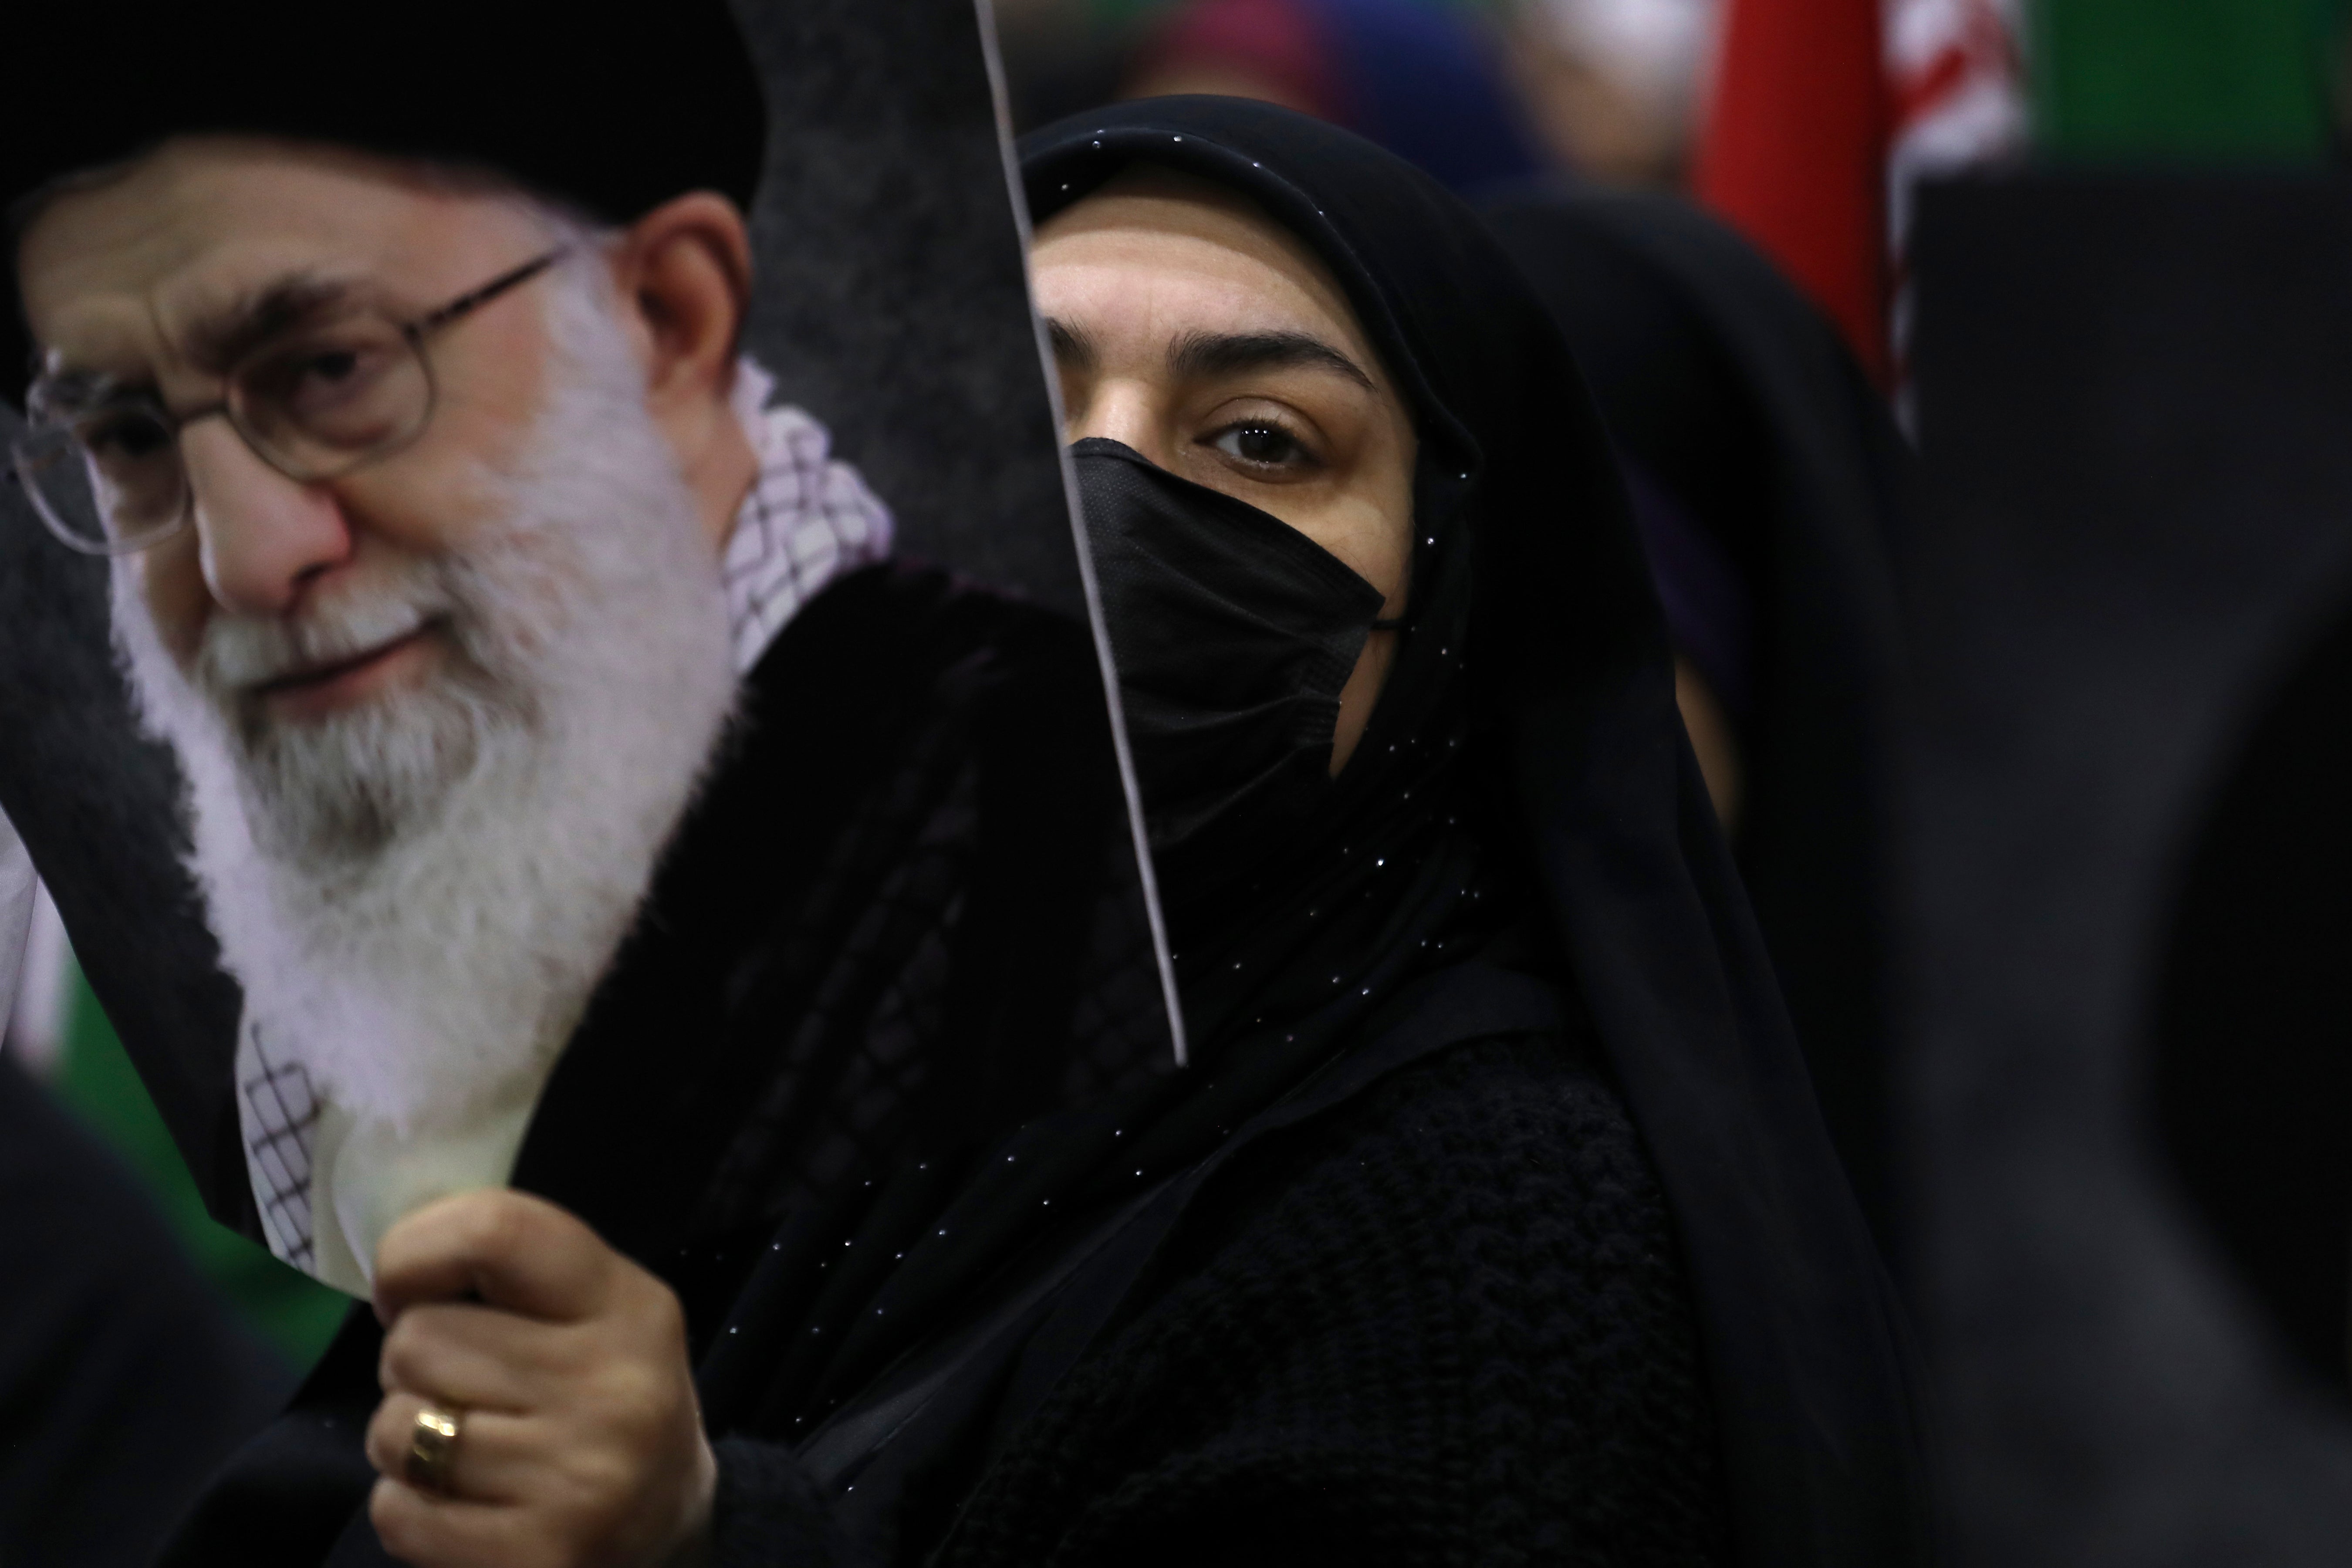 An Iranian woman holds a poster of the supreme leader Ayatollah Ali Khamenei during an election campaign